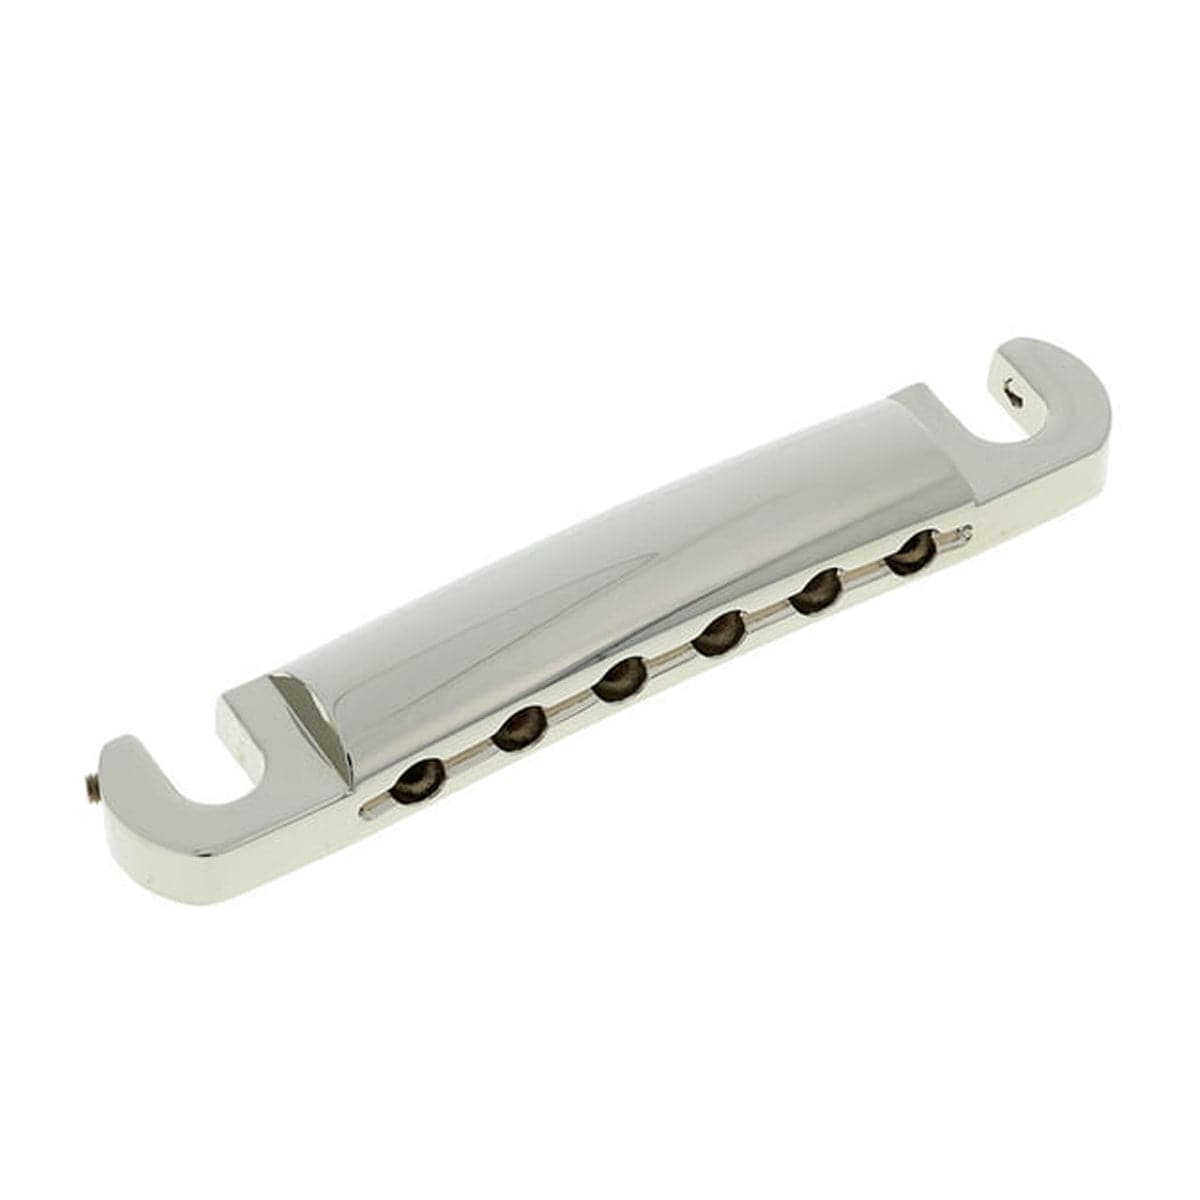 TonePros T1ZS Stopbar Tailpiece for Gibson Les Paul & SG - Nickel